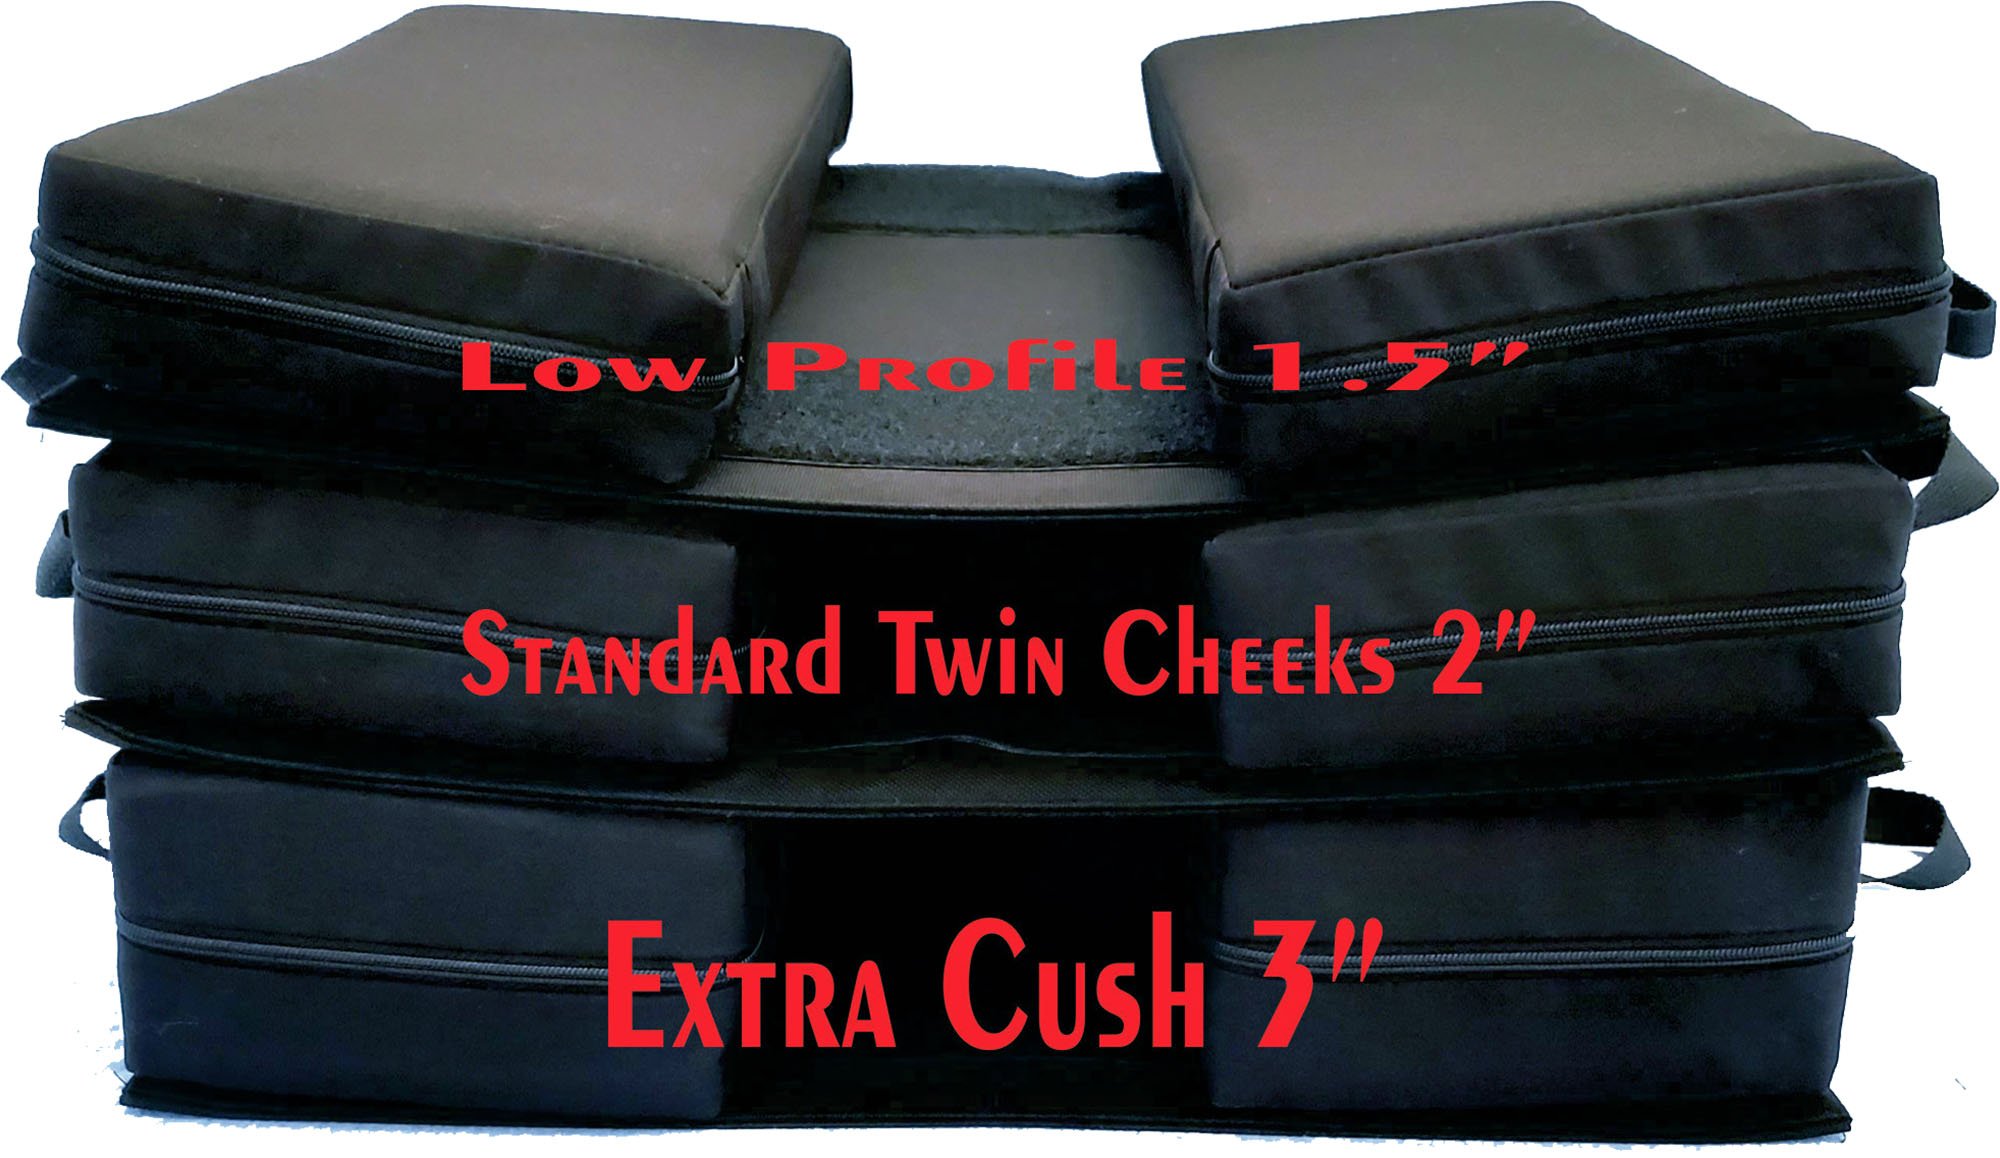 Low Profile Twin Cheeks Cushion — Cushion Your Assets